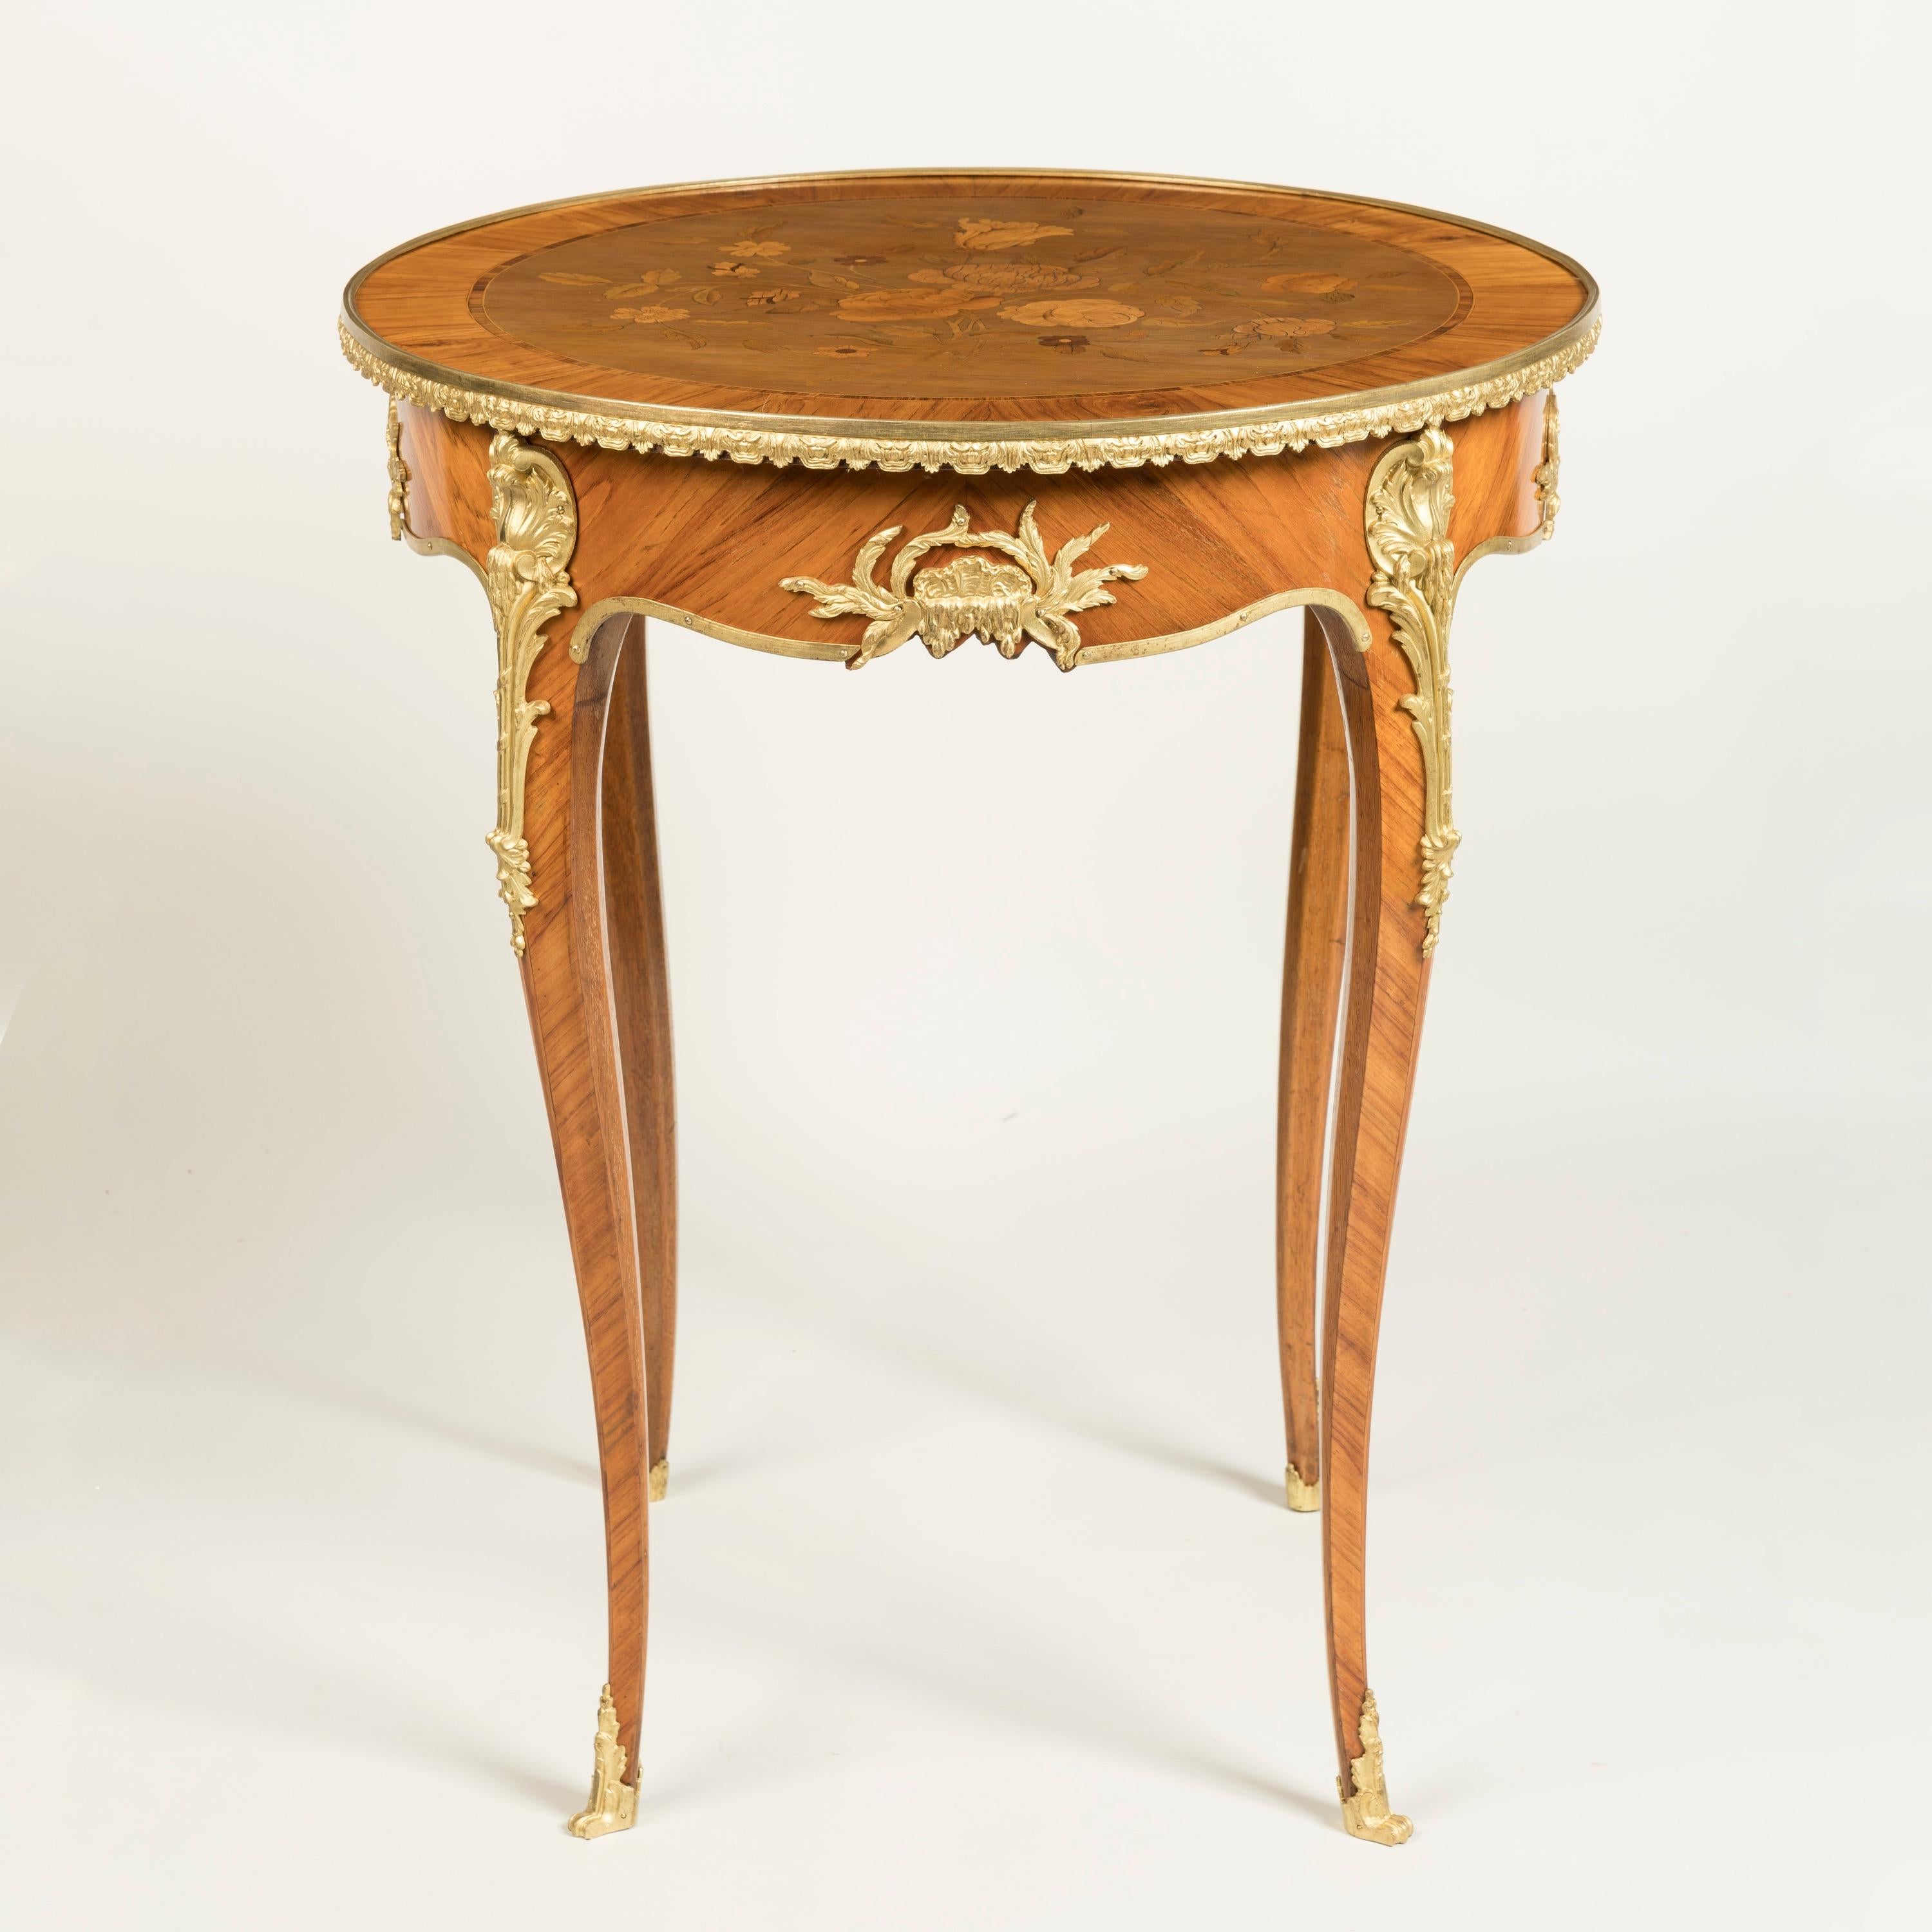 A Very Fine Marquetry Inlaid Occasional Table
Firmly Attributed to François Linke

This fine table, closely related to other examples by François Linke, is veneered with tulipwood and dressed with fine ormolu mounts; the circular table supported on